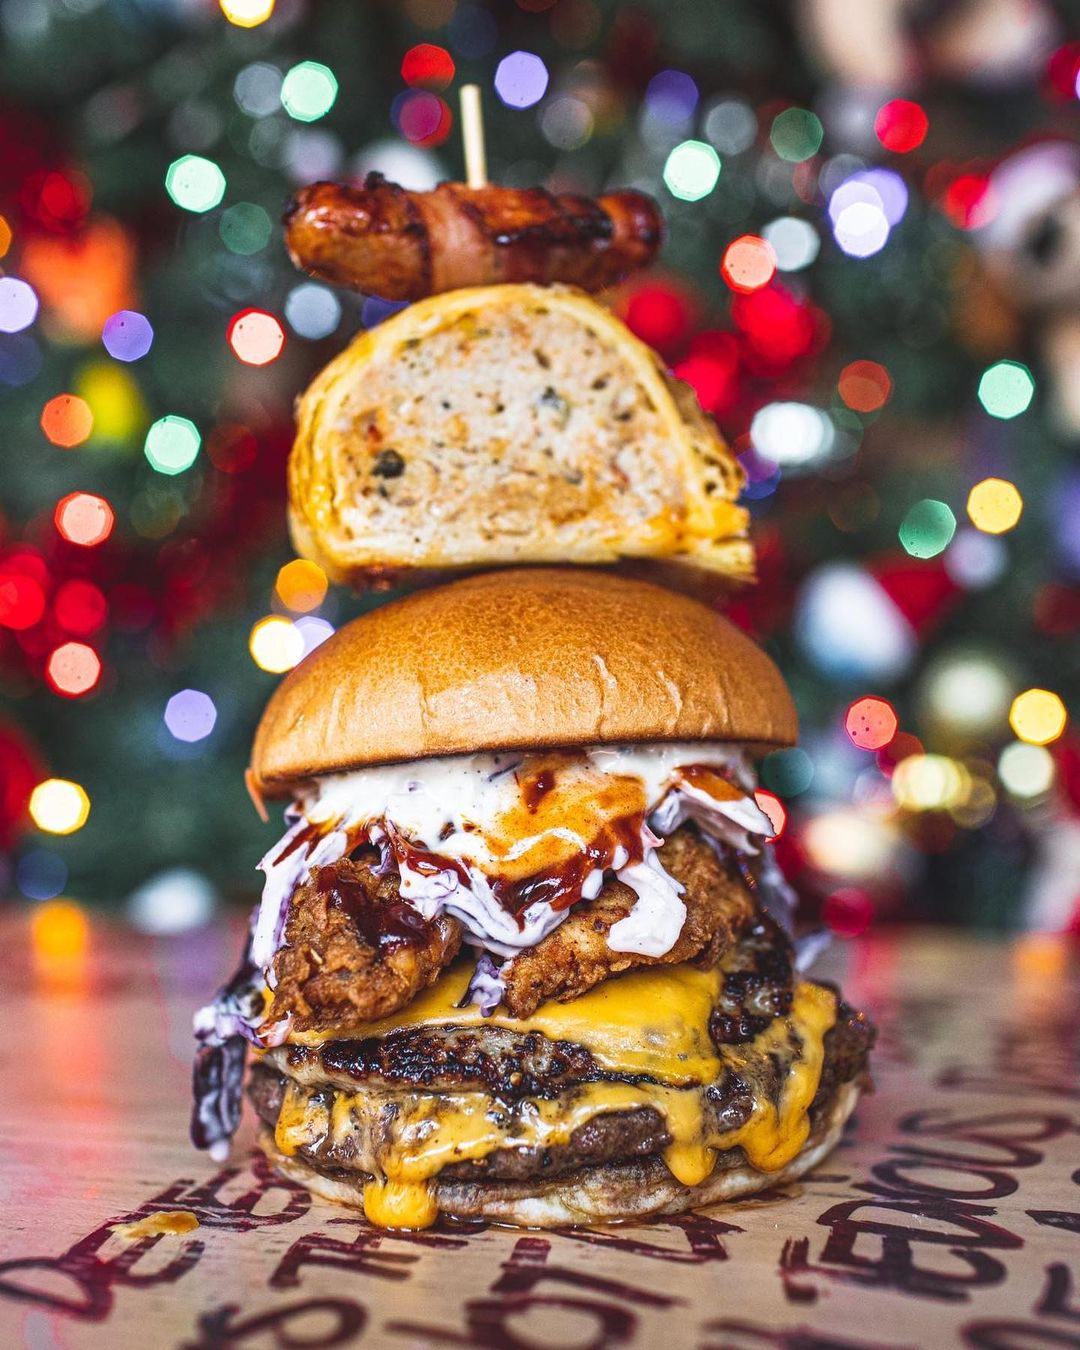 The almost famous Christmas special with brandy mayo.